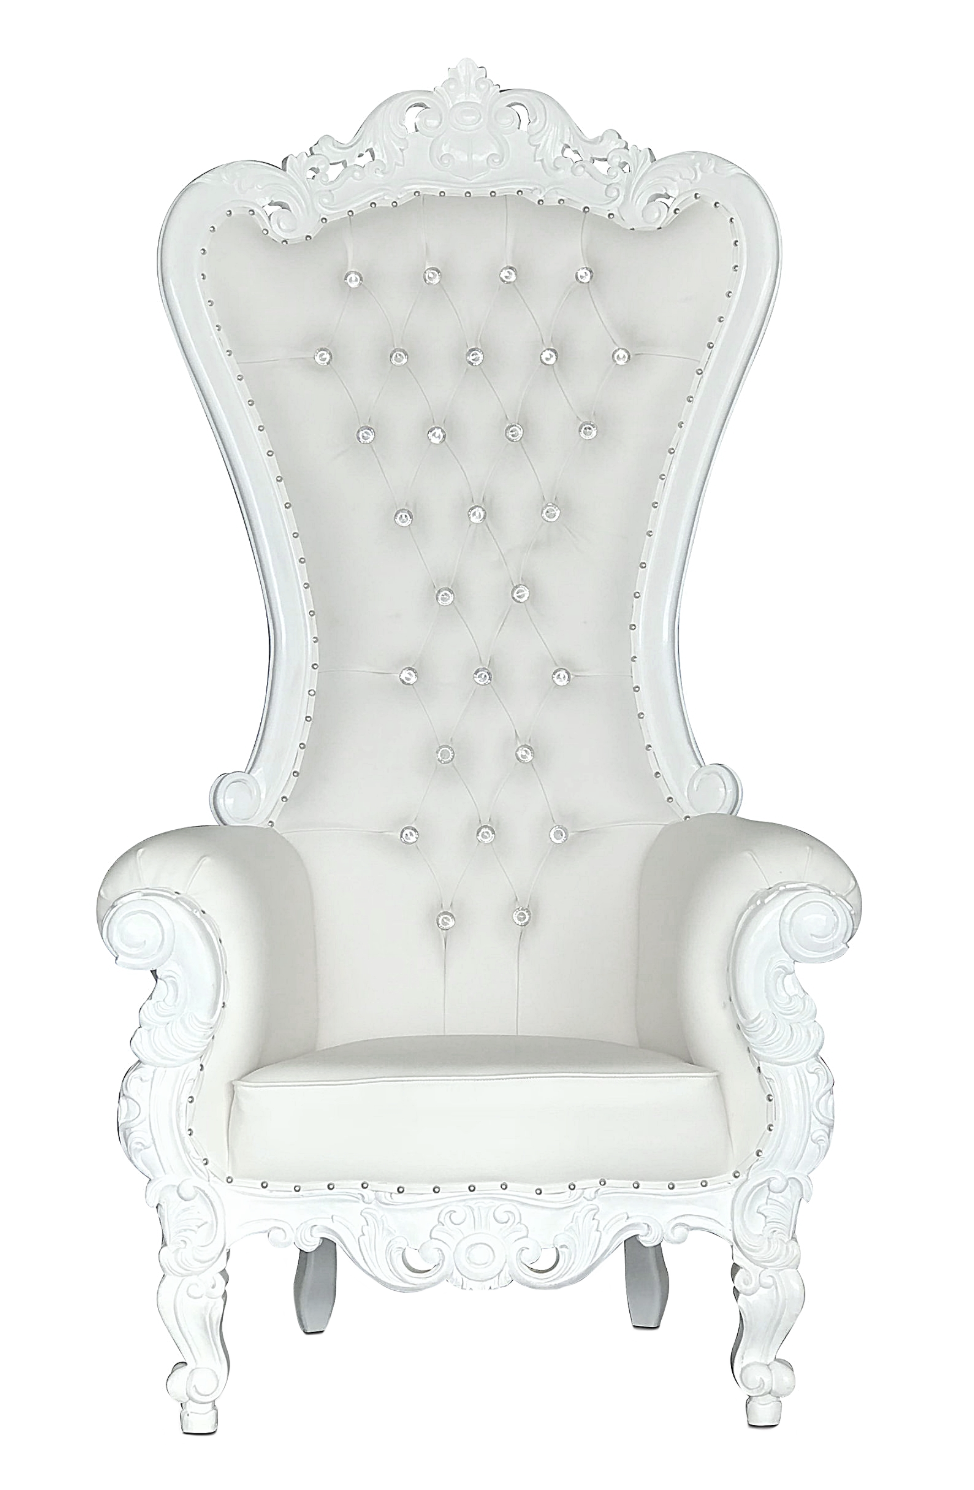 Reign of Thrones~12 Royal King/Queen Throne Chairs